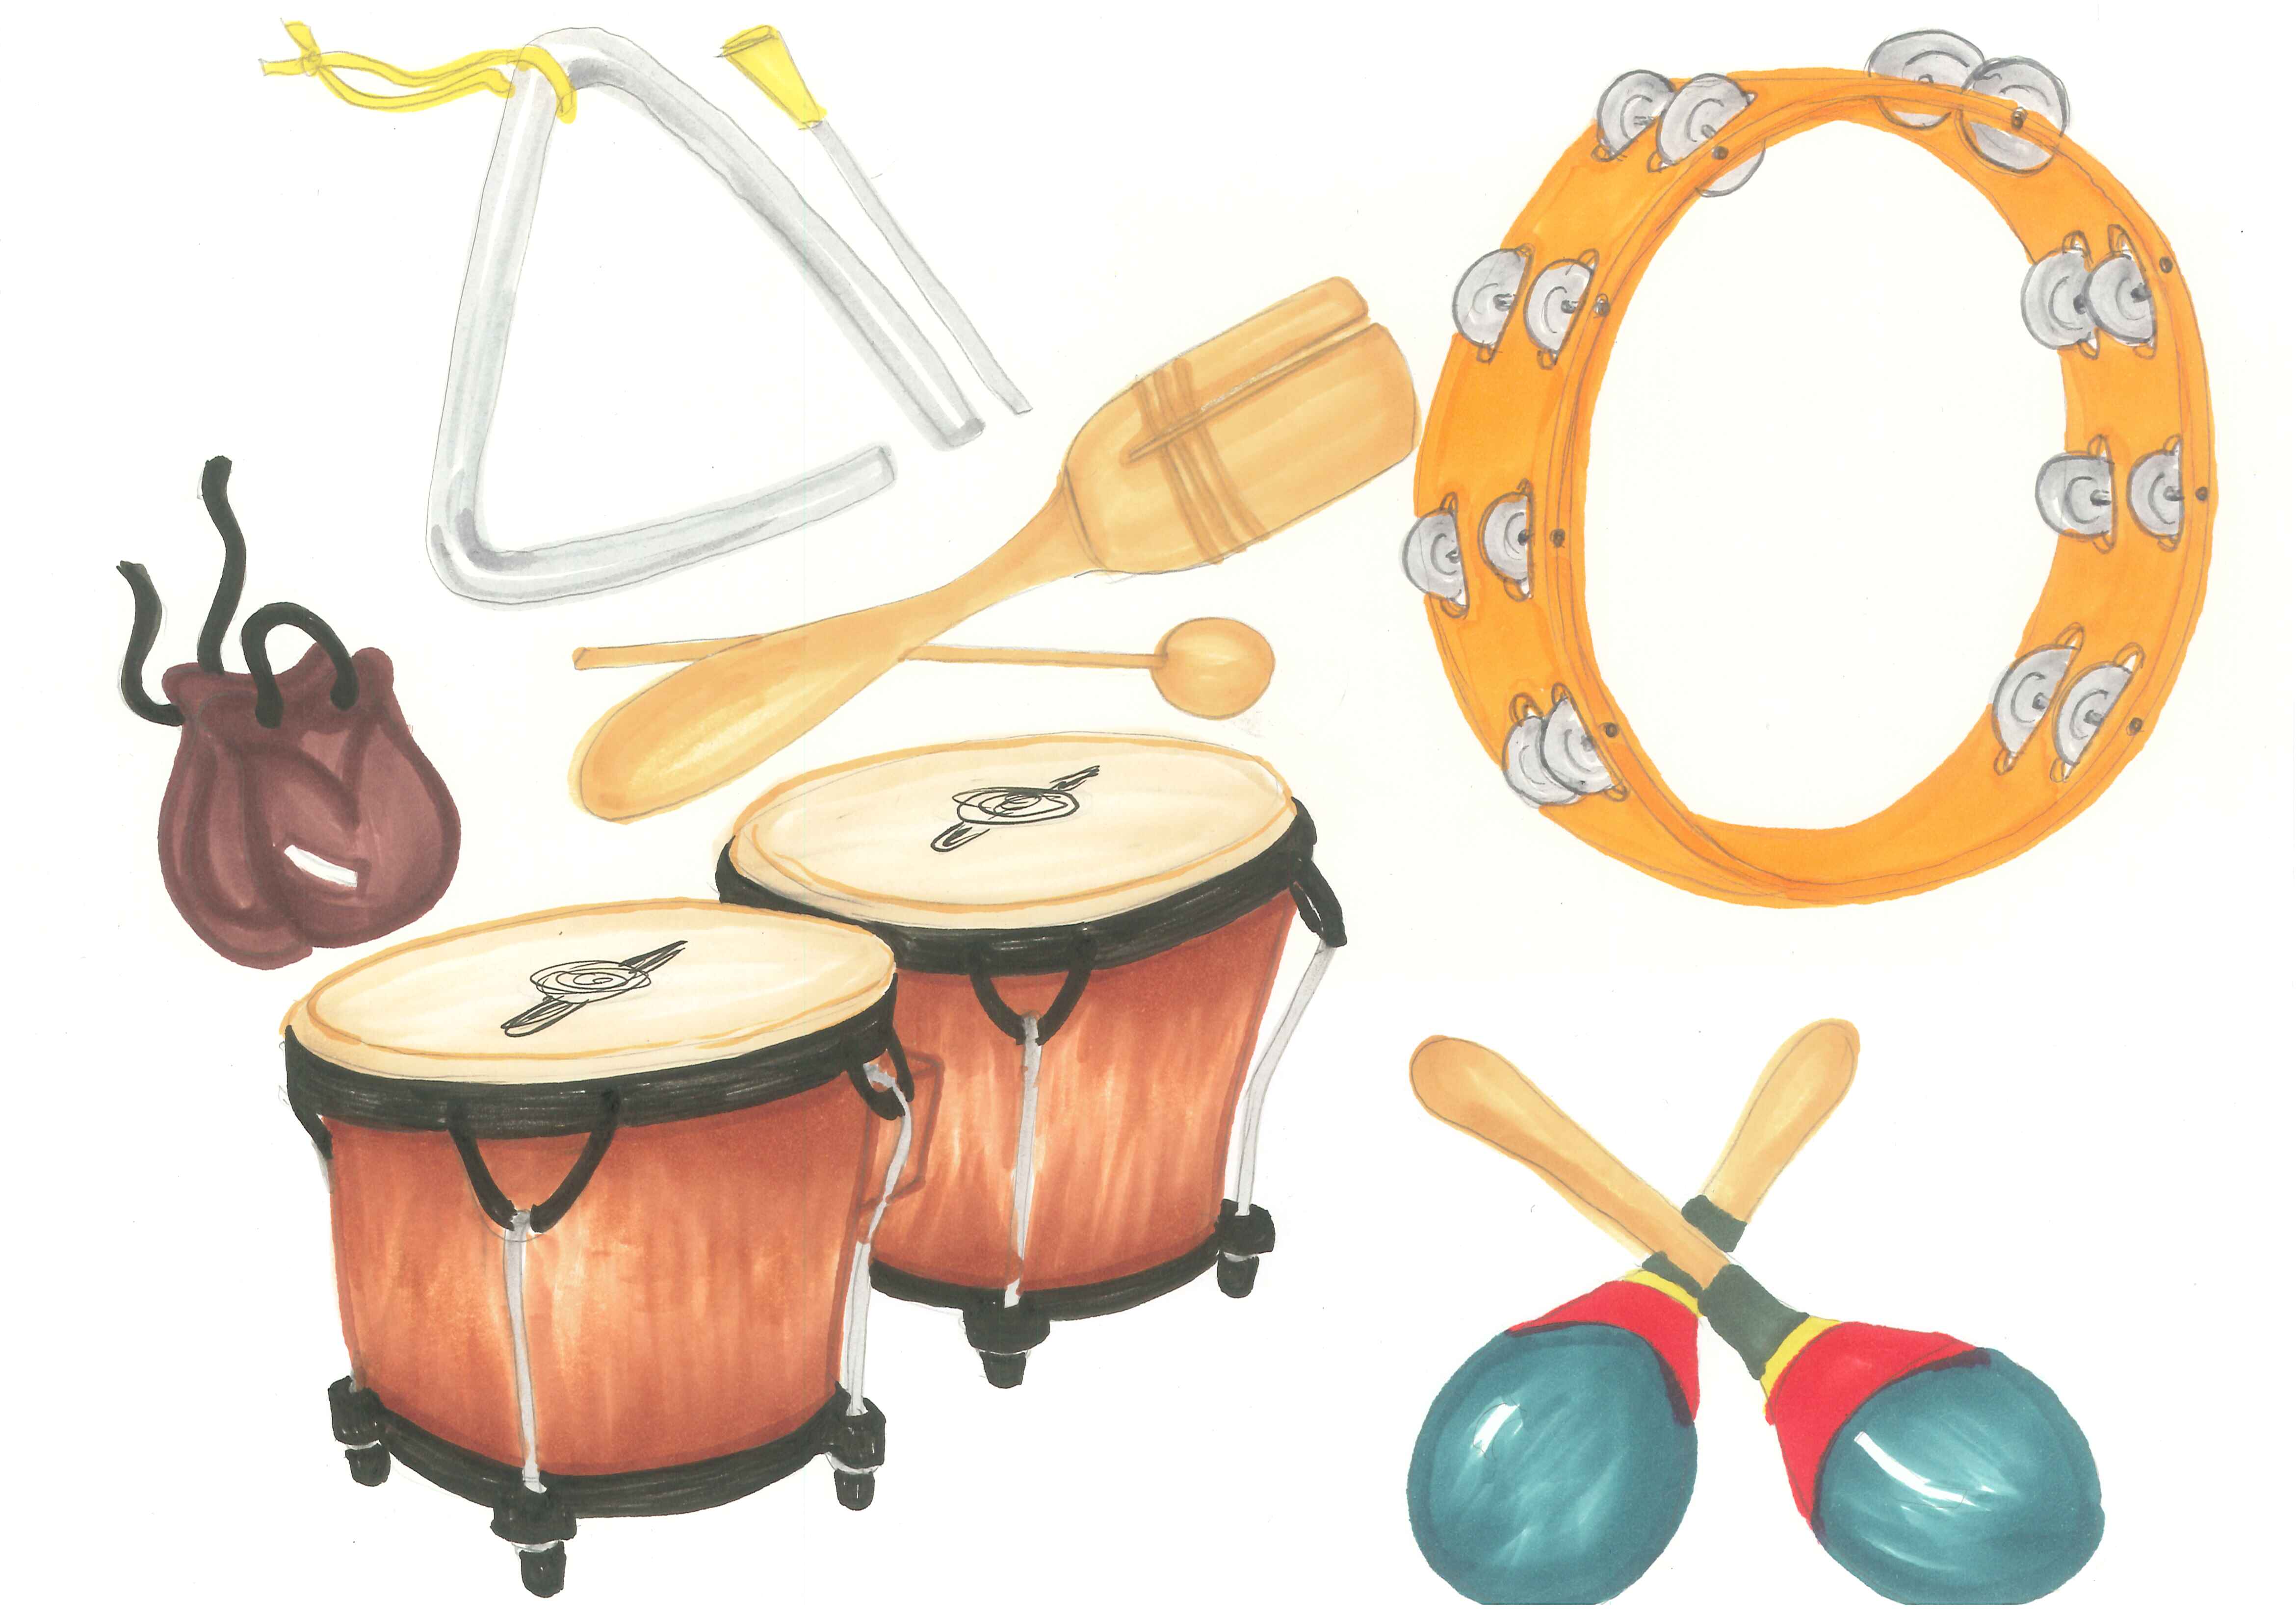 Clip Art – Musical Instruments by Stephanie Stoner | AJET